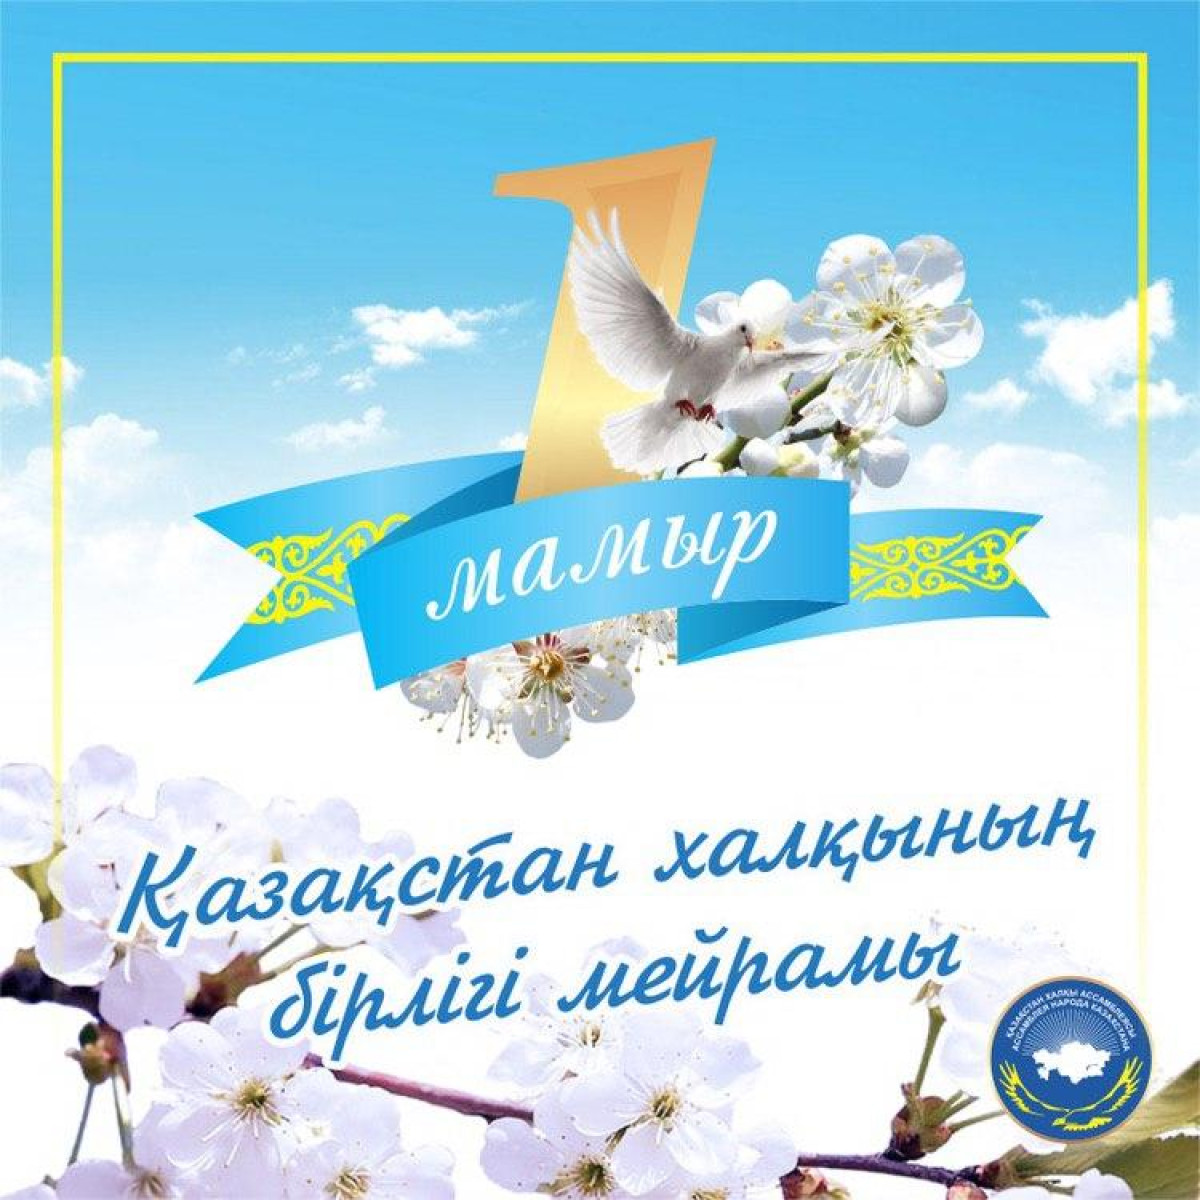 ASSEMBLY OF PEOPLE OF KAZAKHSTAN CONGRATULATES ON THE HOLIDAY OF KAZAKHSTAN PEOPLE’S UNITY